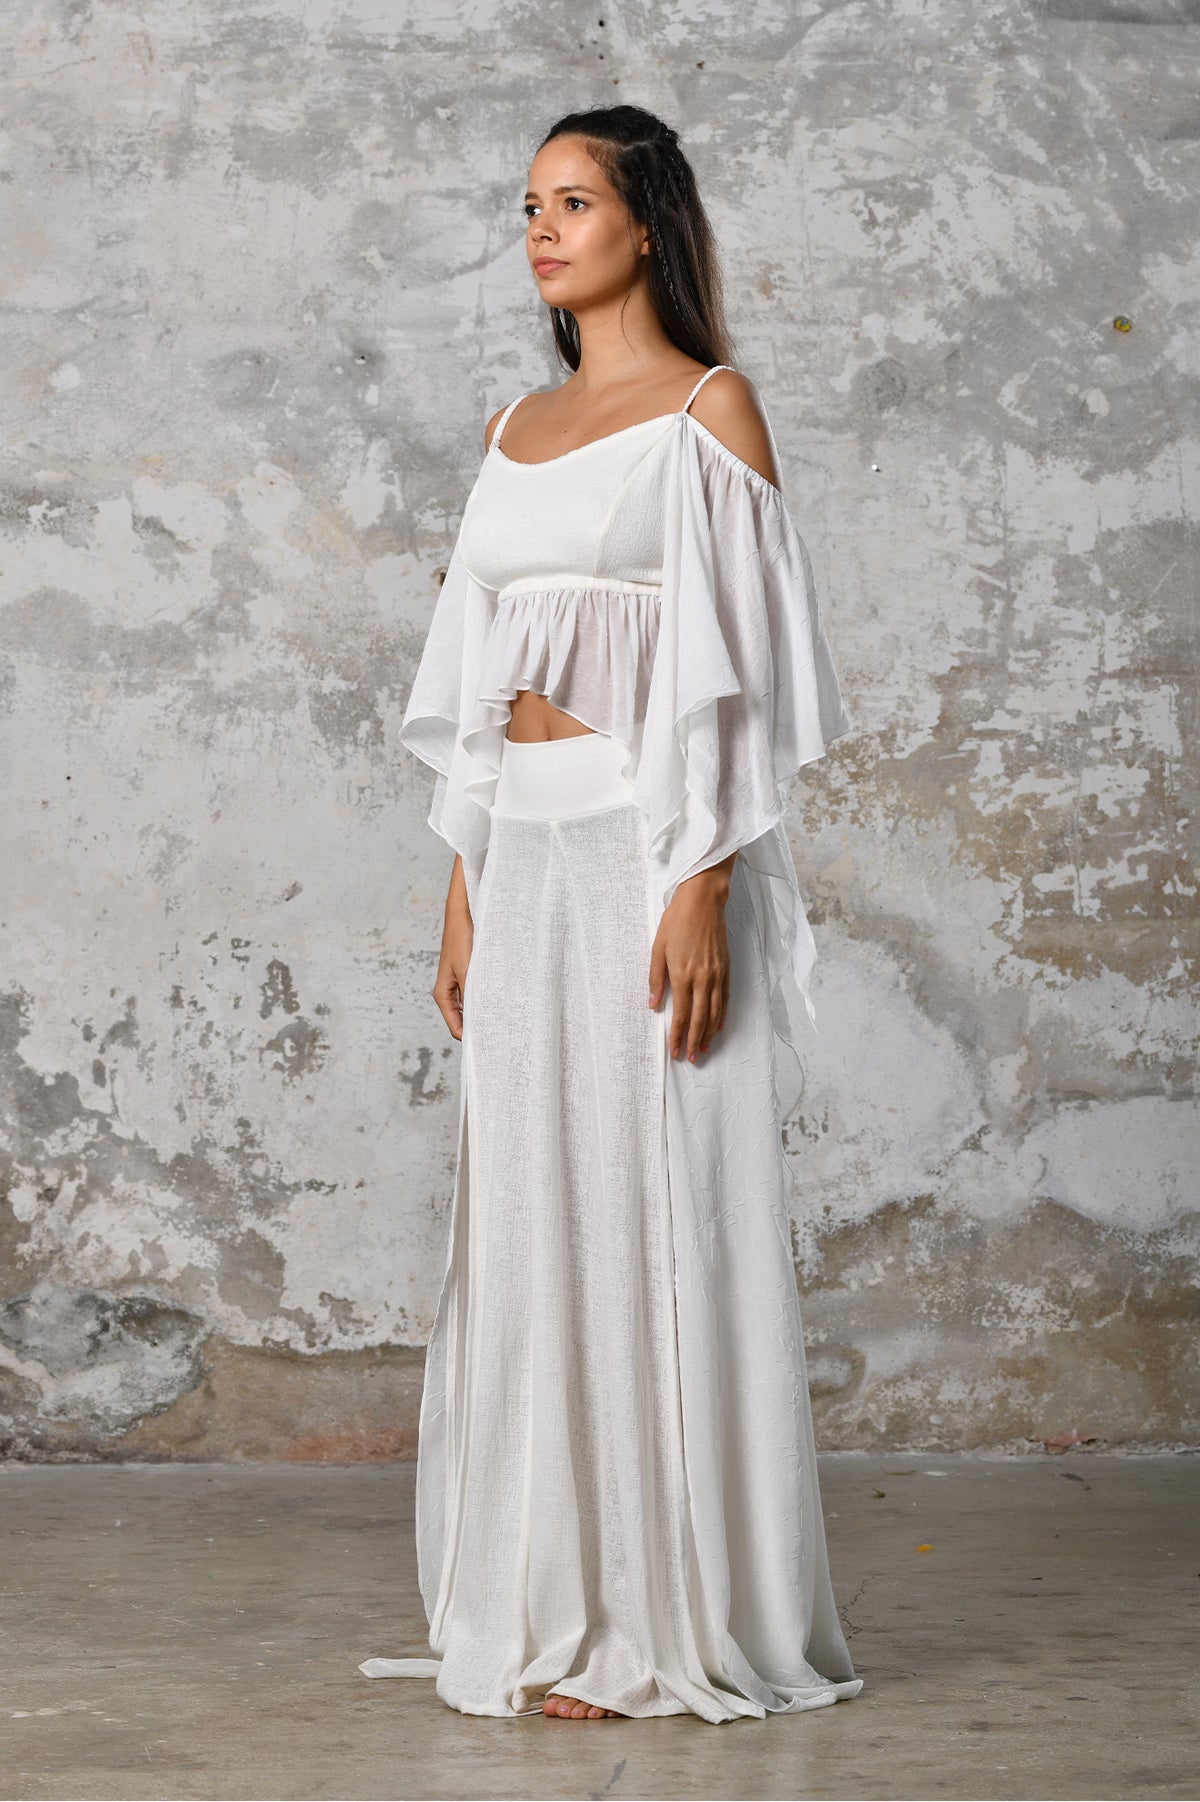 An enchanting Bohemian Venus white, perfect for boho and festival-inspired looks, exuding a goddess-like quality. The flowy fabric and intricate side details create an ethereal, bohemian style perfect for Burning Man and other occasions. This garment is an ethically crafted gem